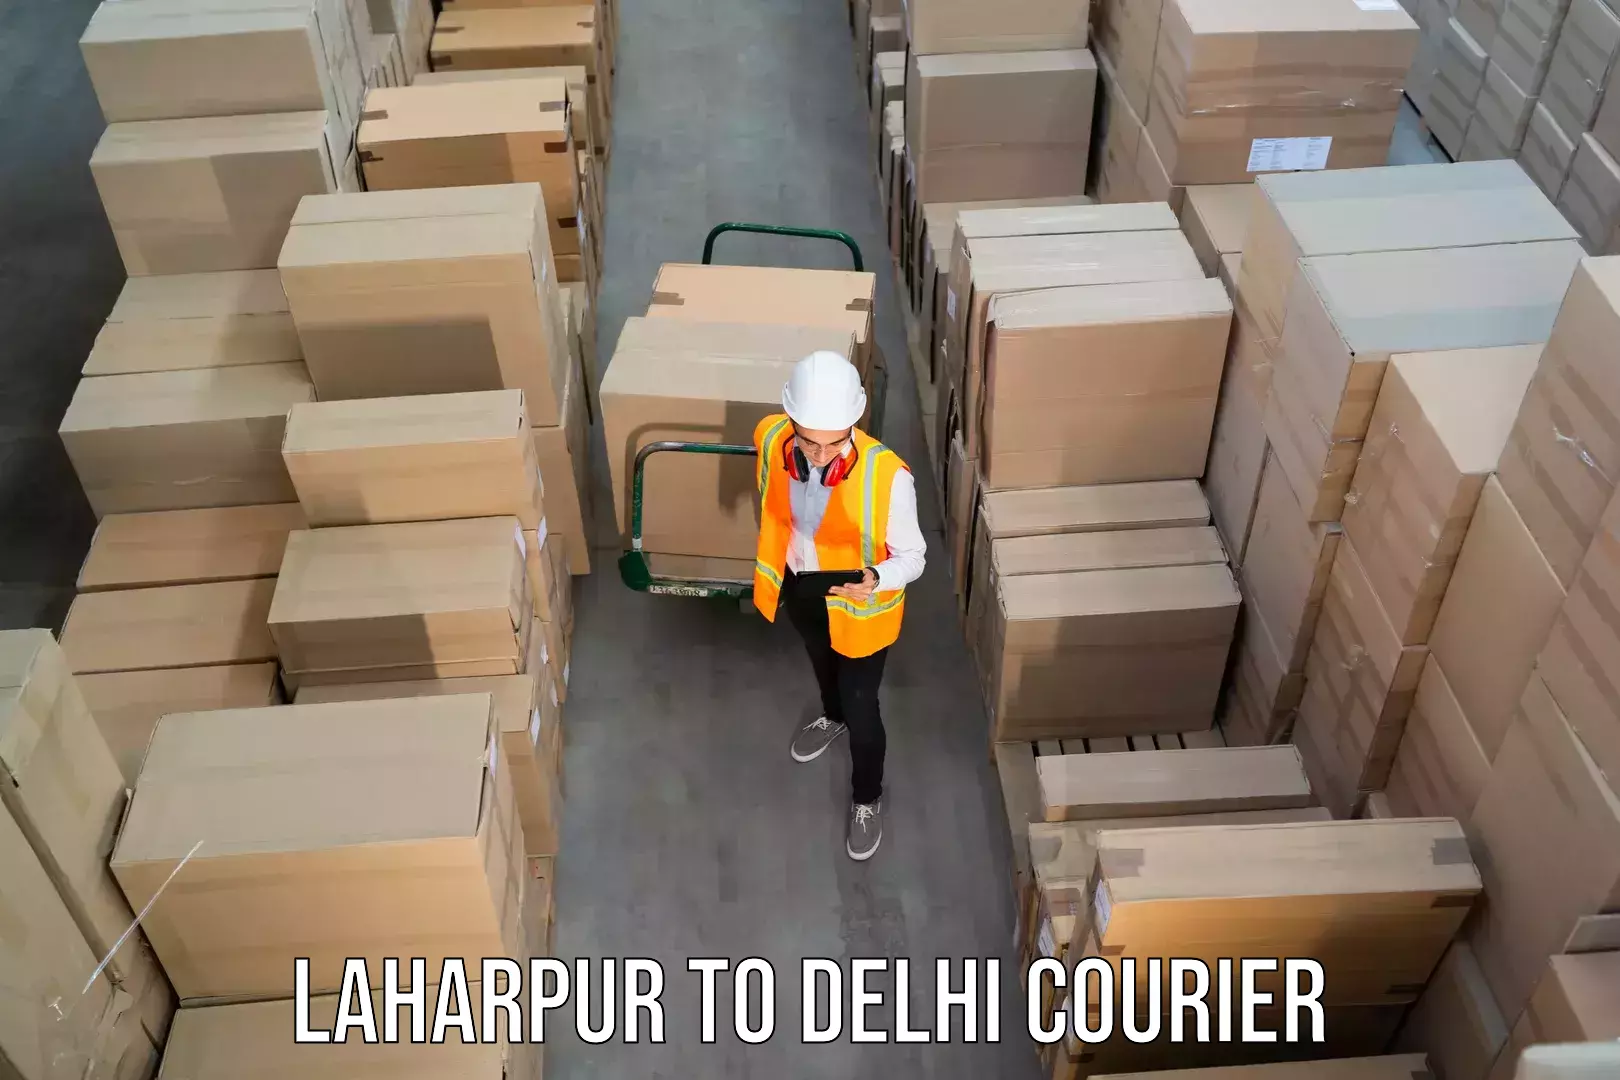 Flexible delivery schedules Laharpur to Indraprastha